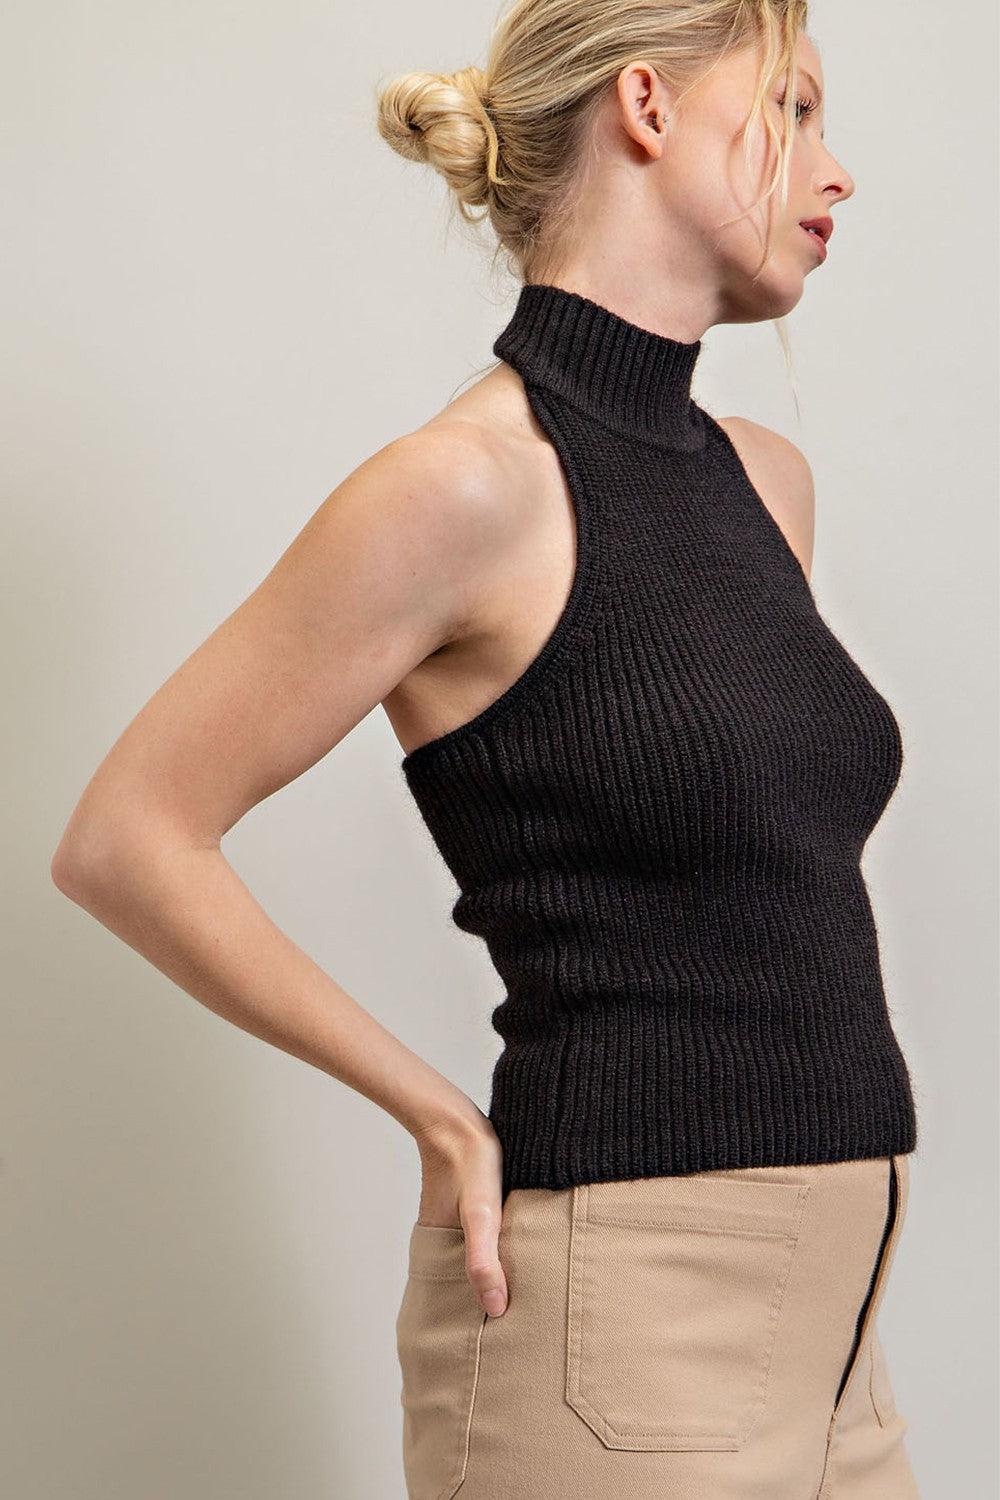 halter turtleneck sweater top - RK Collections Boutique